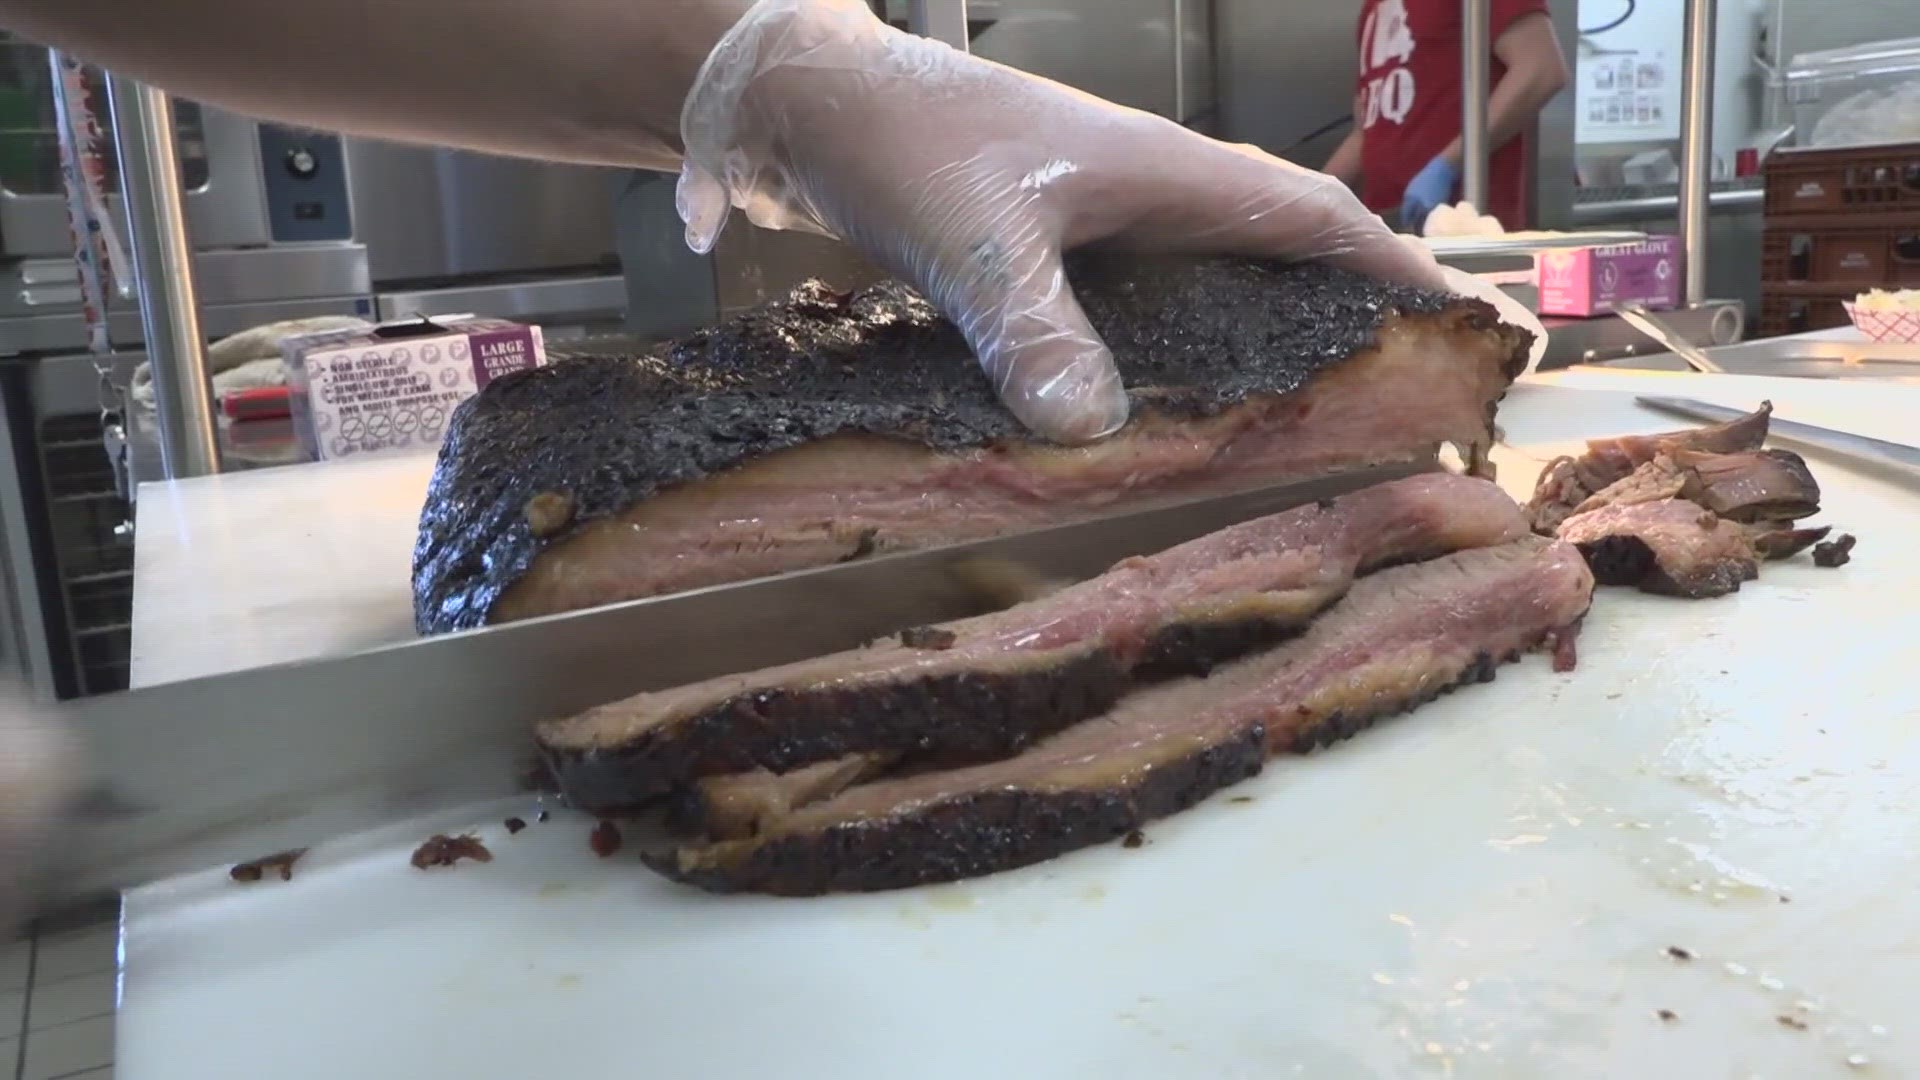 A new list from LawnStarter puts St. Louis as the second-best barbecue city in the U.S. Kansas City took the top title, with high marks for awards and festivals